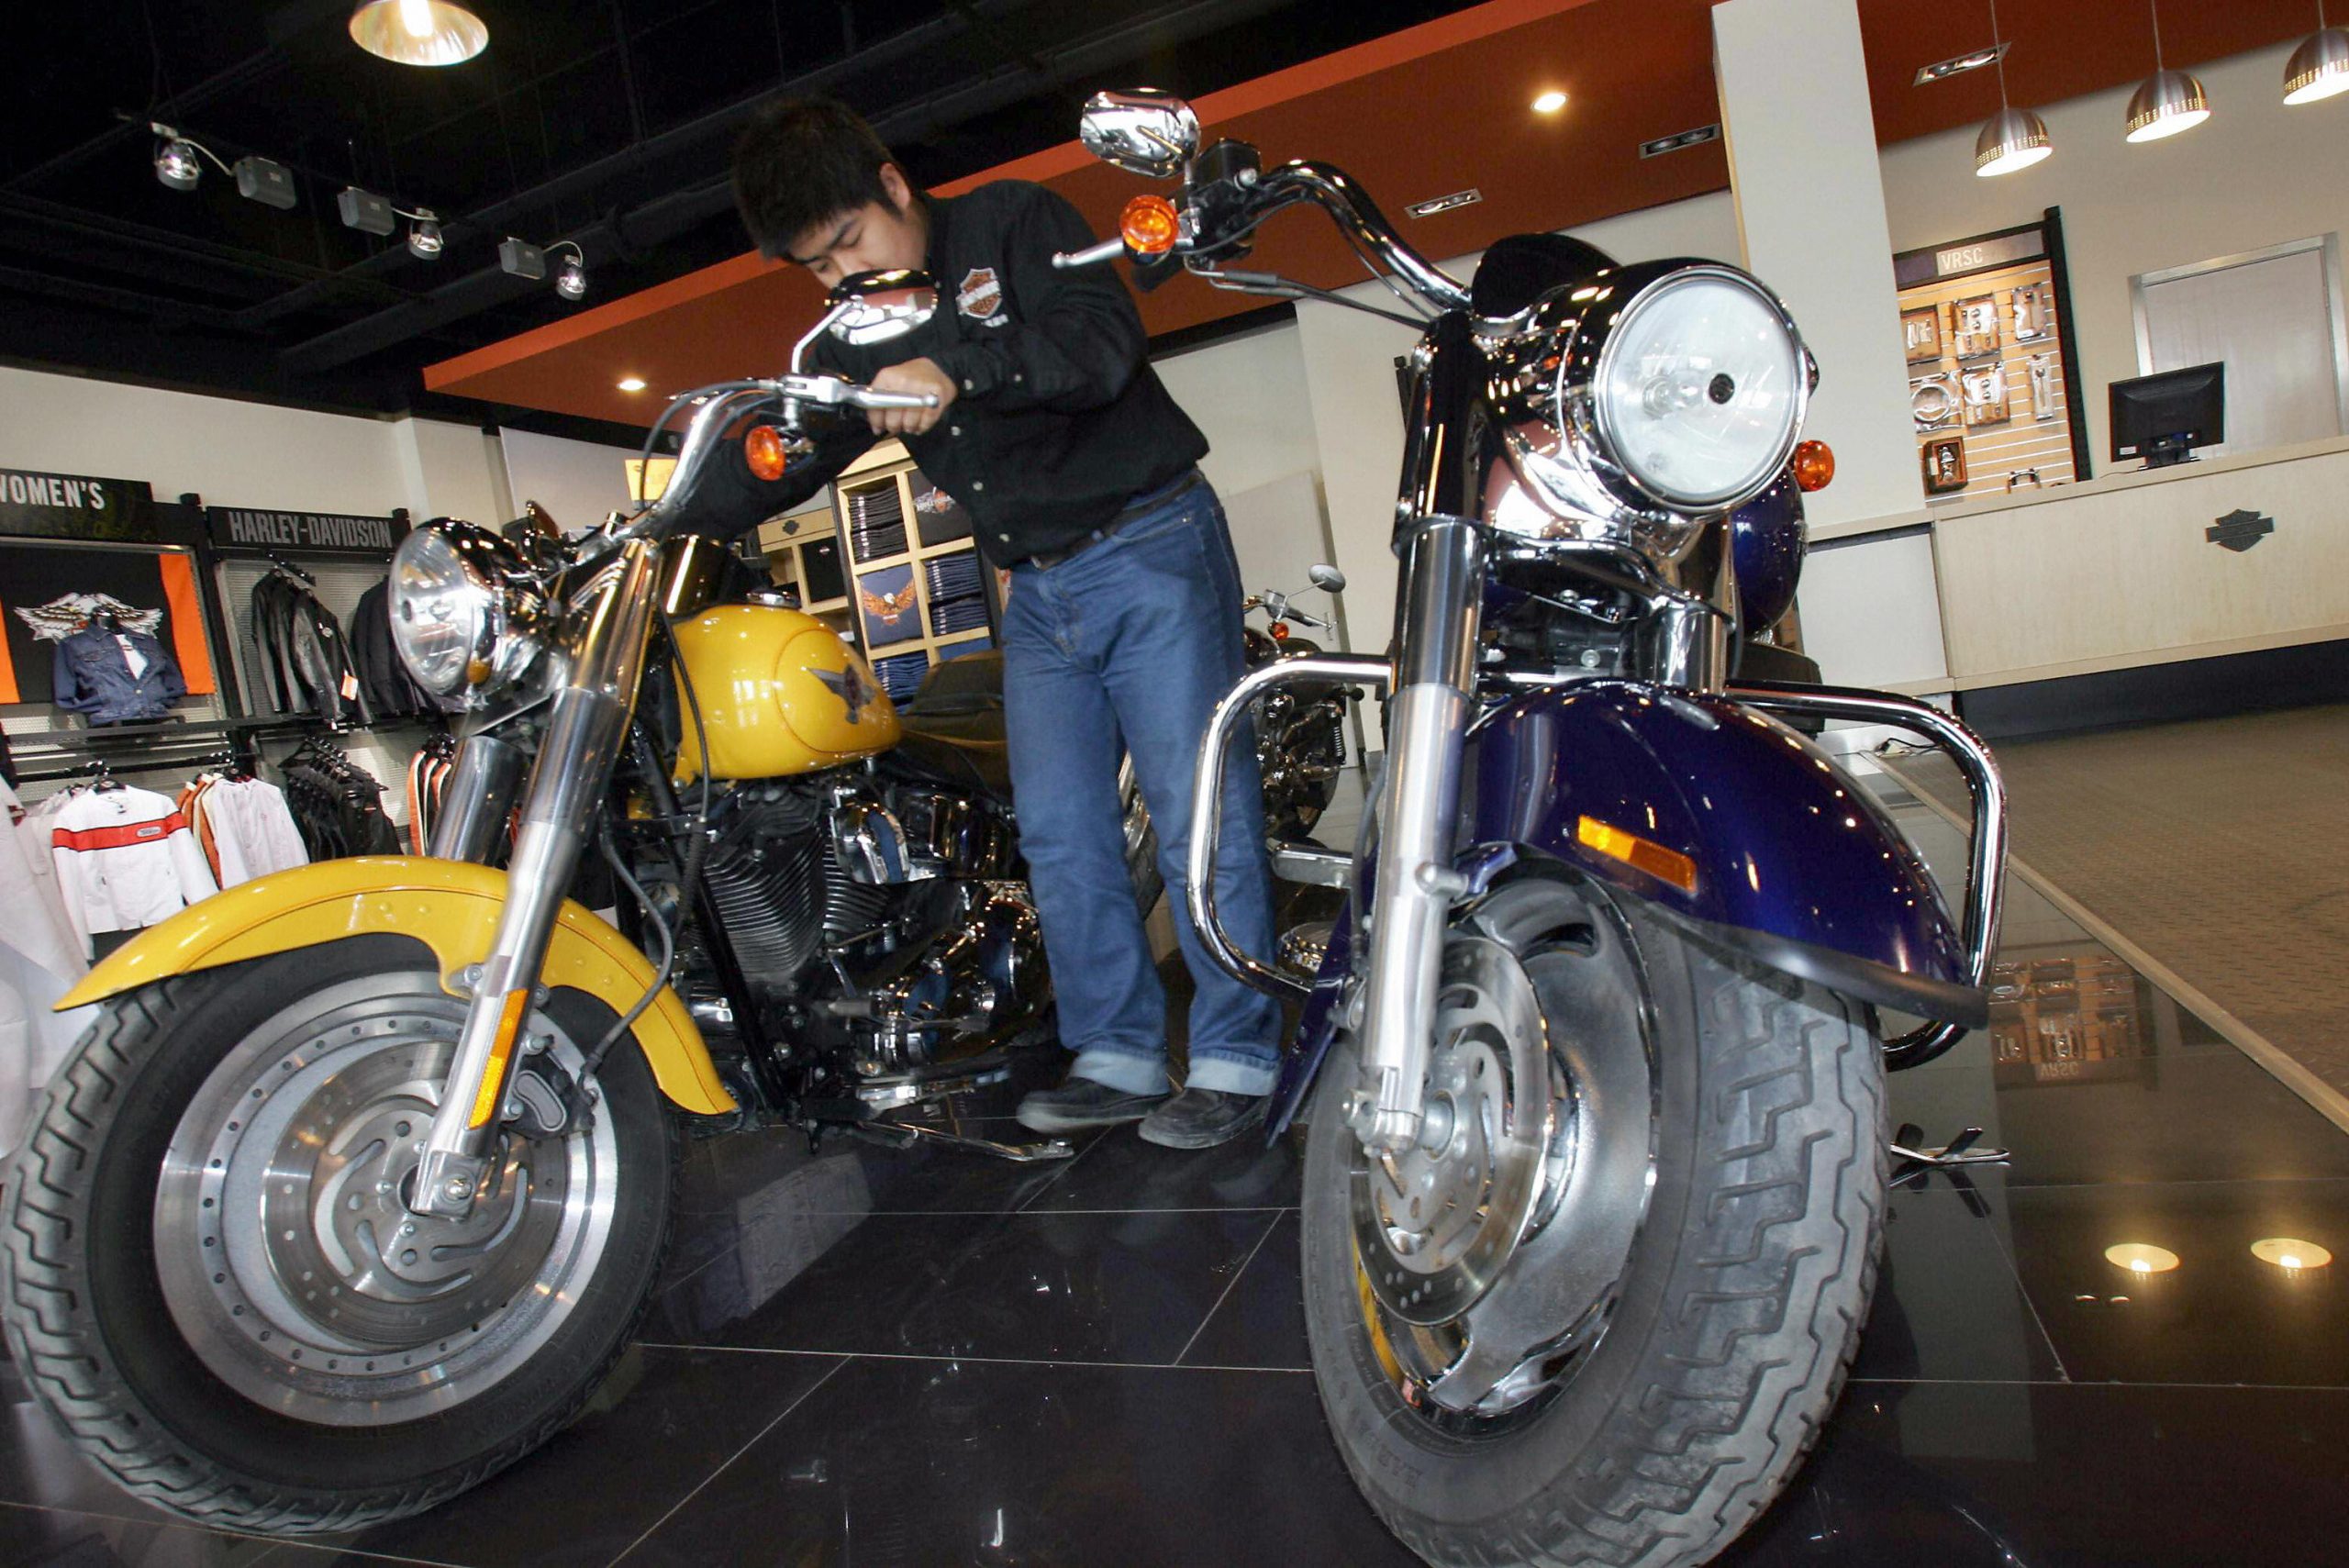  A salesman arranges one of the Harley-Davidson's bikes on display